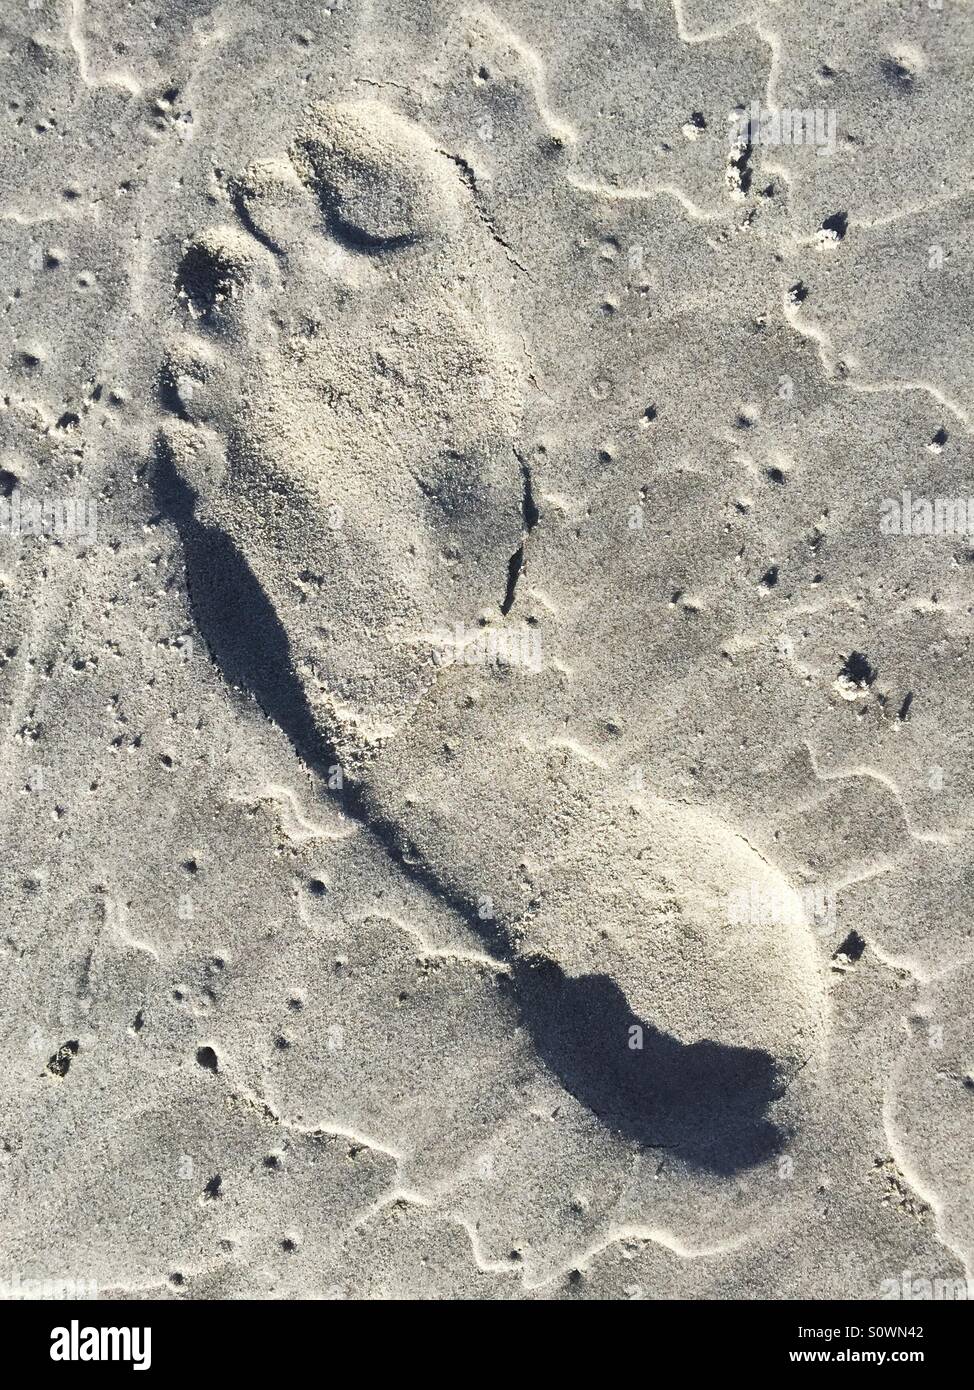 Footprint in the sand Stock Photo - Alamy